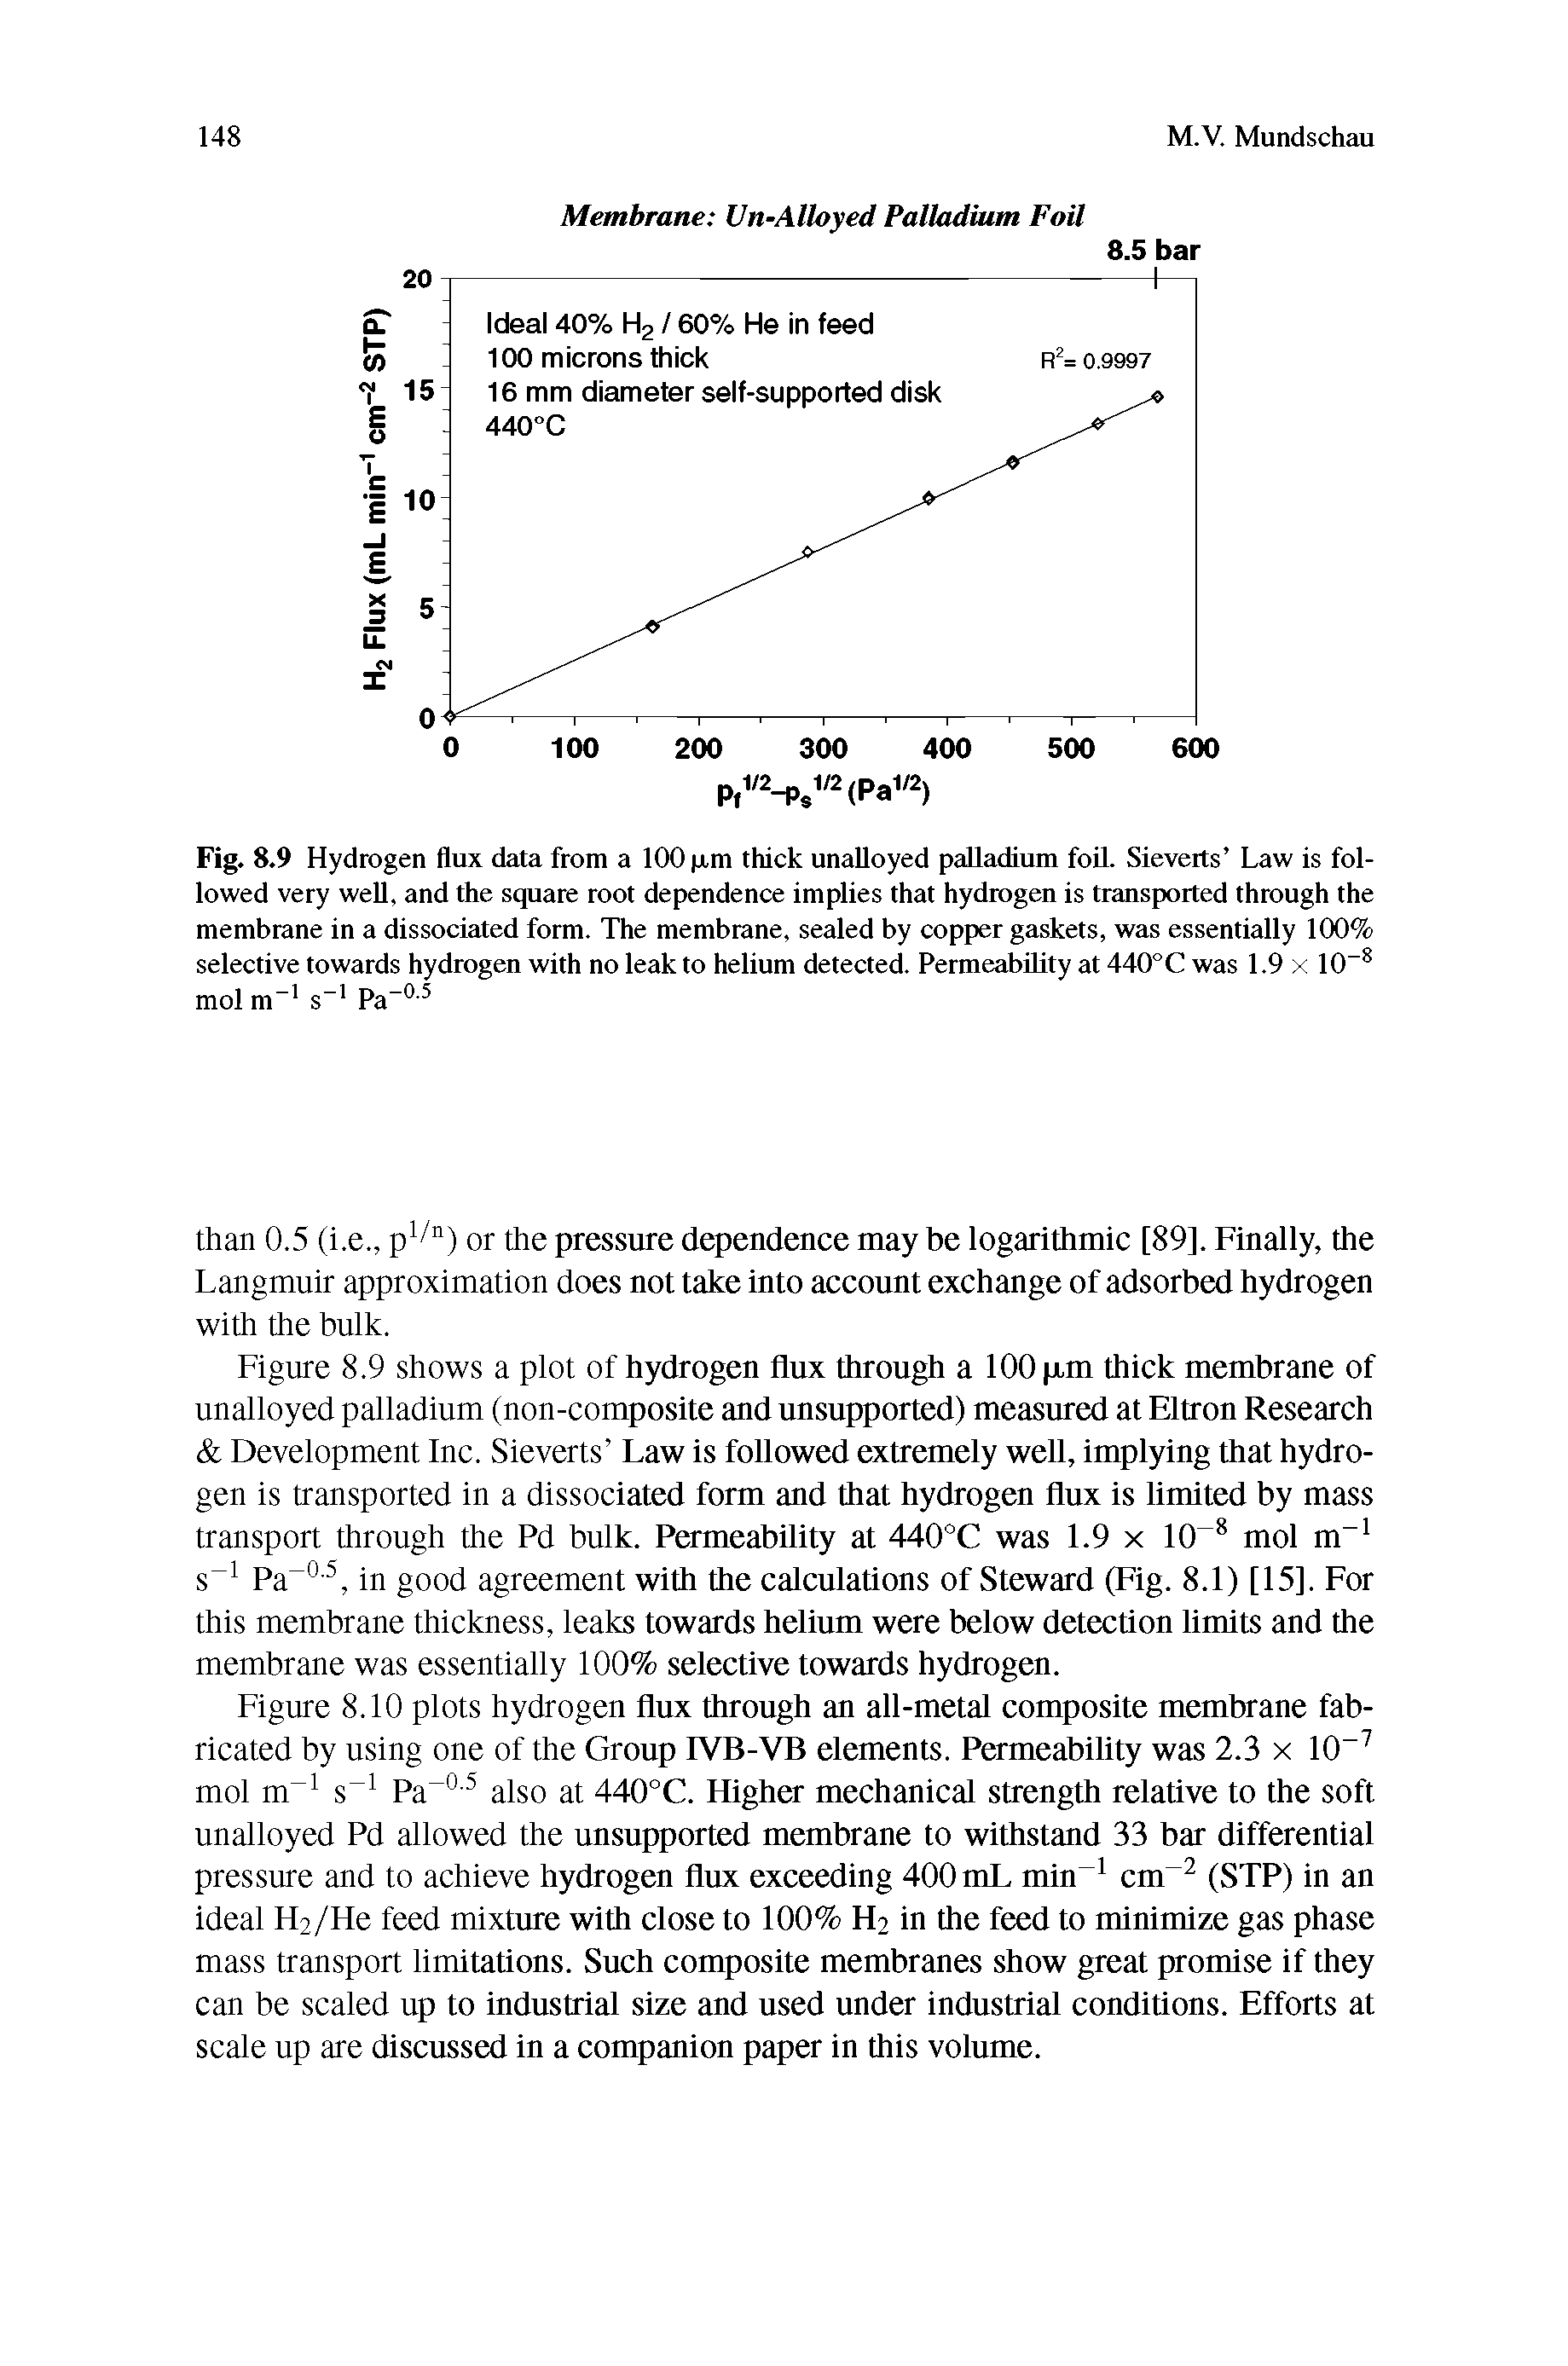 Fig. 8.9 Hydrogen flux data from a 100 xm thick unalloyed ptdladium foiL Sieverts Law is followed very well, and the square root dependence implies that hydrogen is transported through the membrane in a dissociated form. The membrane, sealed by copper gaskets, was essentially 100% selective towards hydrogen with no leak to helium detected. Permeability at 440°C was 1.9 x 10 mol m- s-> Pa- -5...